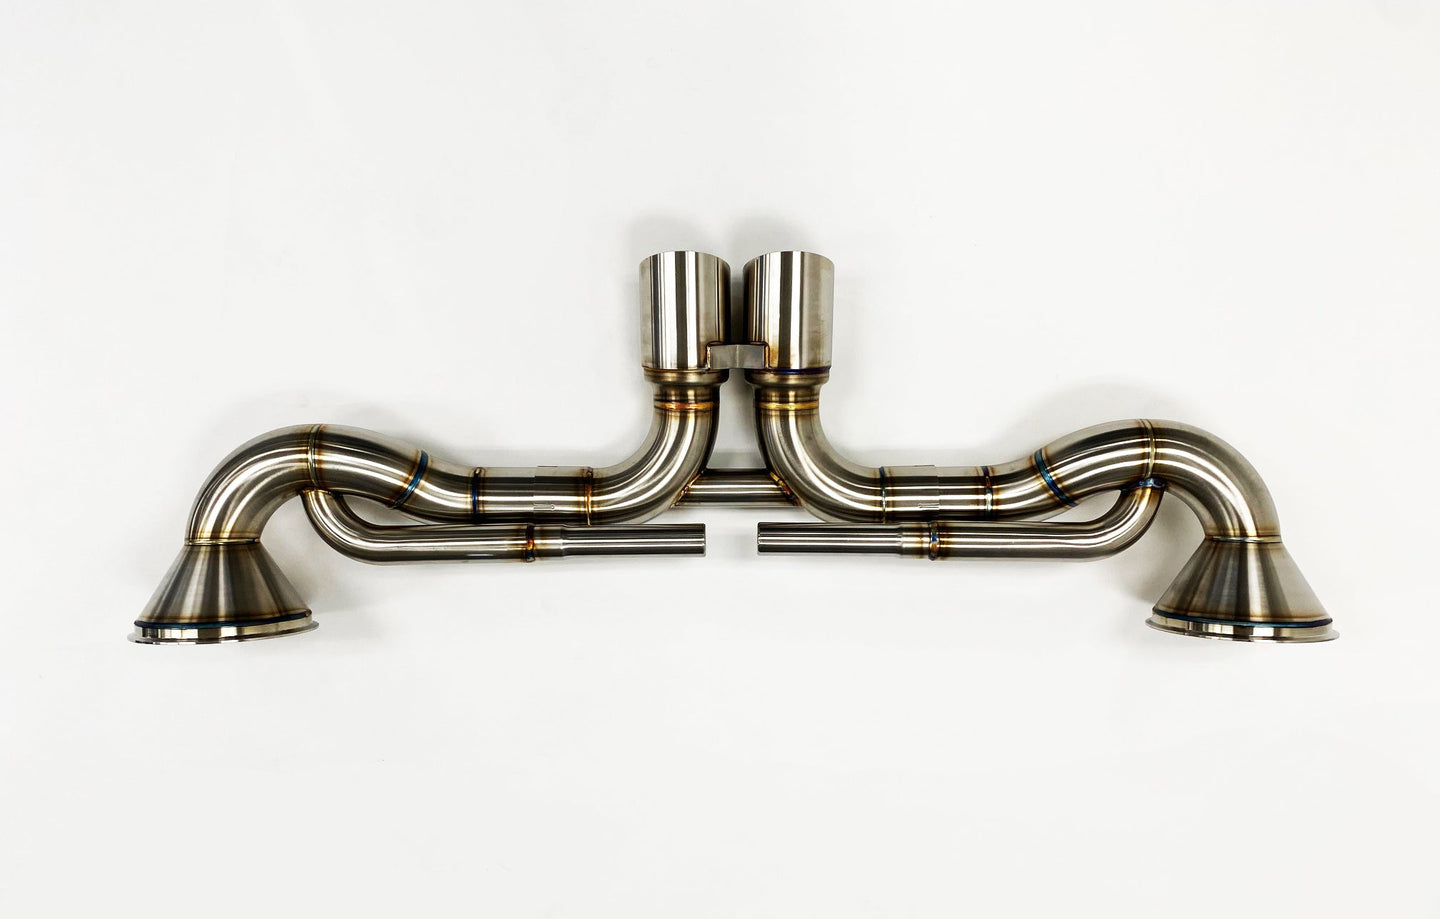 Exhaust System for 992 GT3 / GT3RS - EU (GPF Monitored cars)